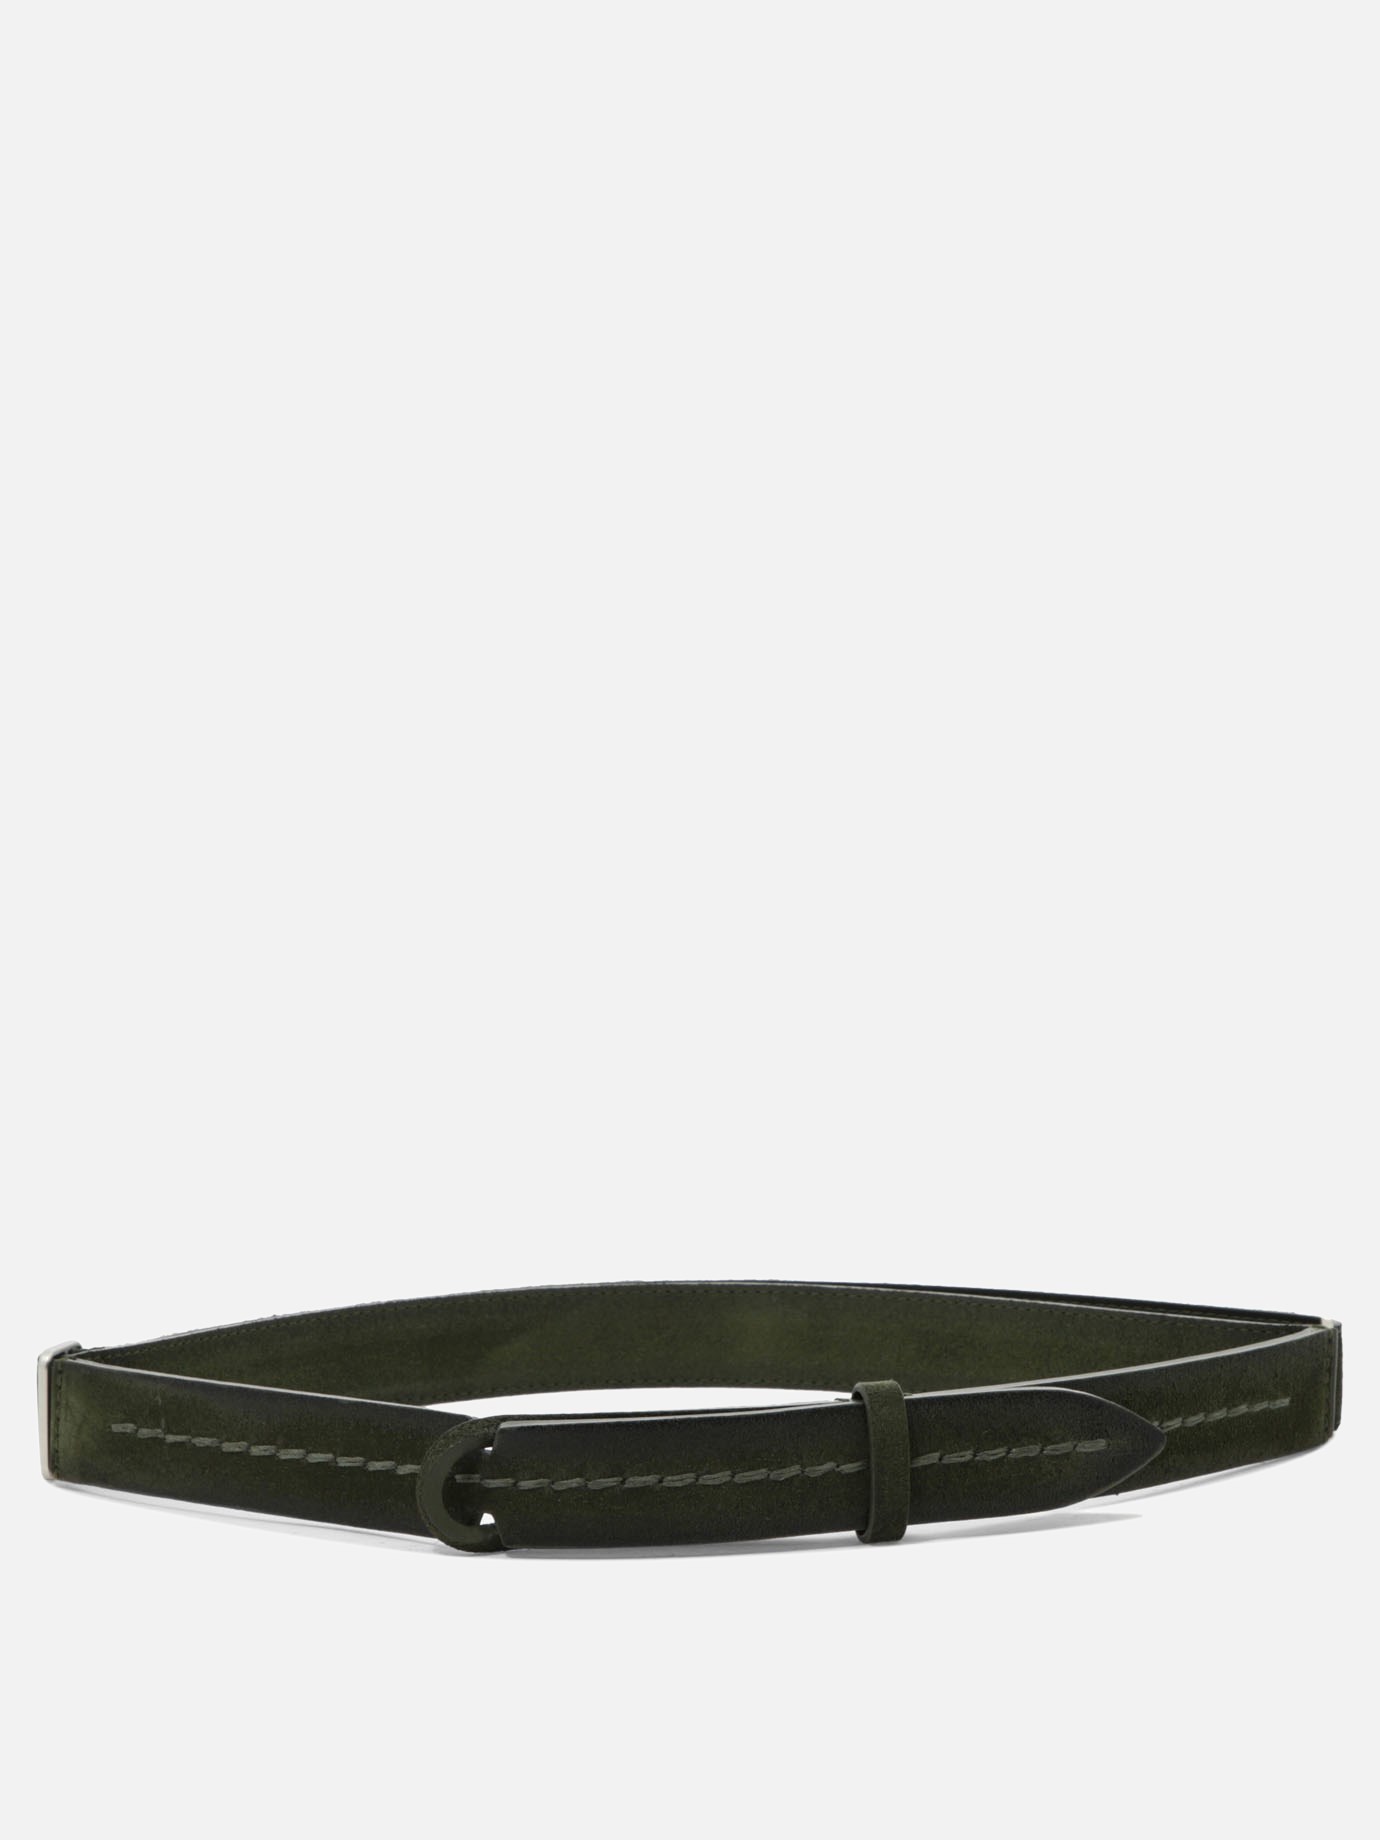  NoBuckle  beltby Orciani - 2